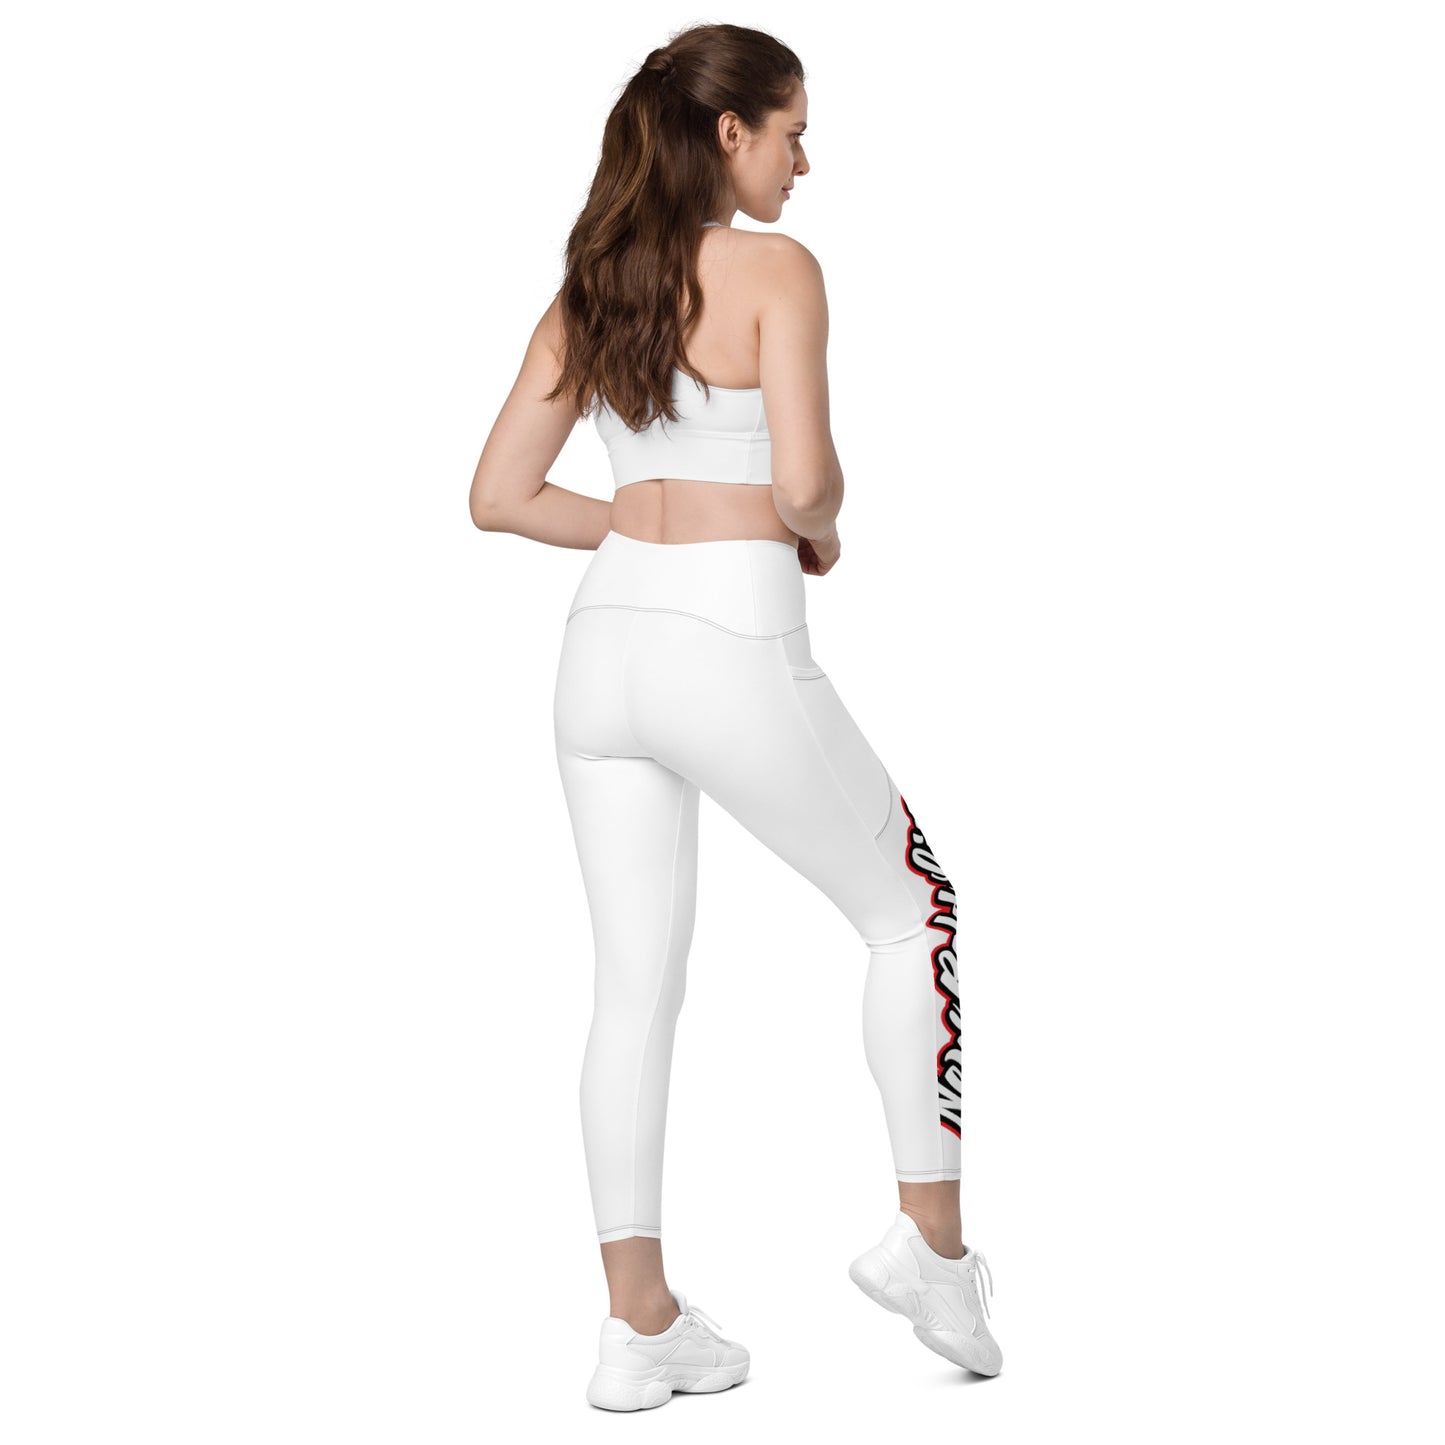 NBL Leggings (with pockets) - Women's Apparel